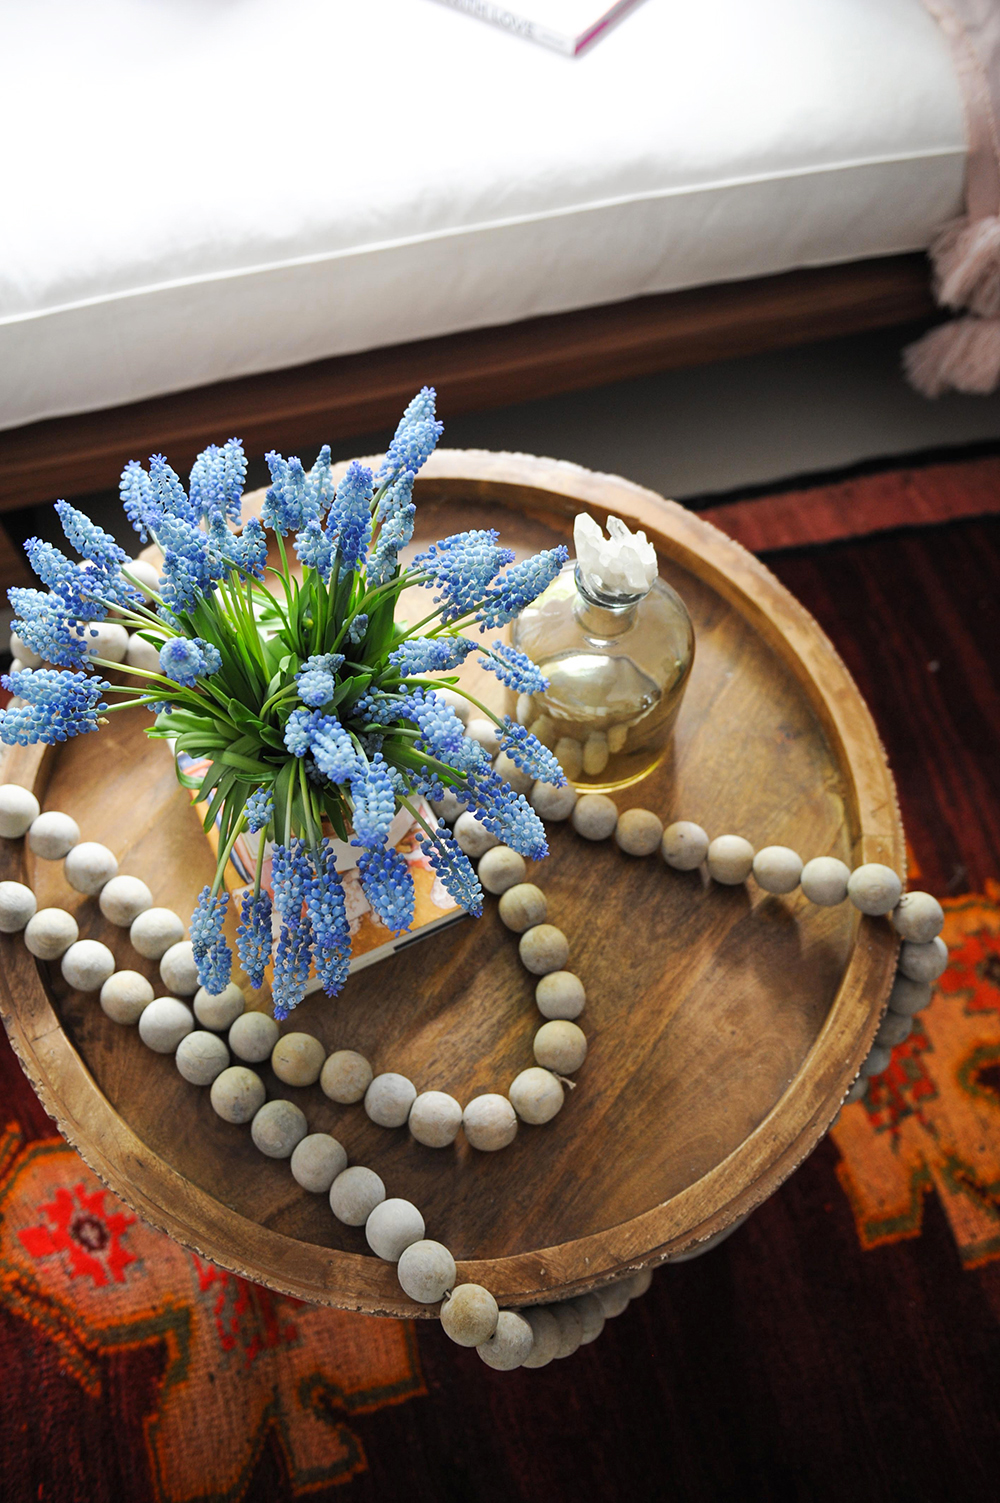 A small circular table with meditation decor on top